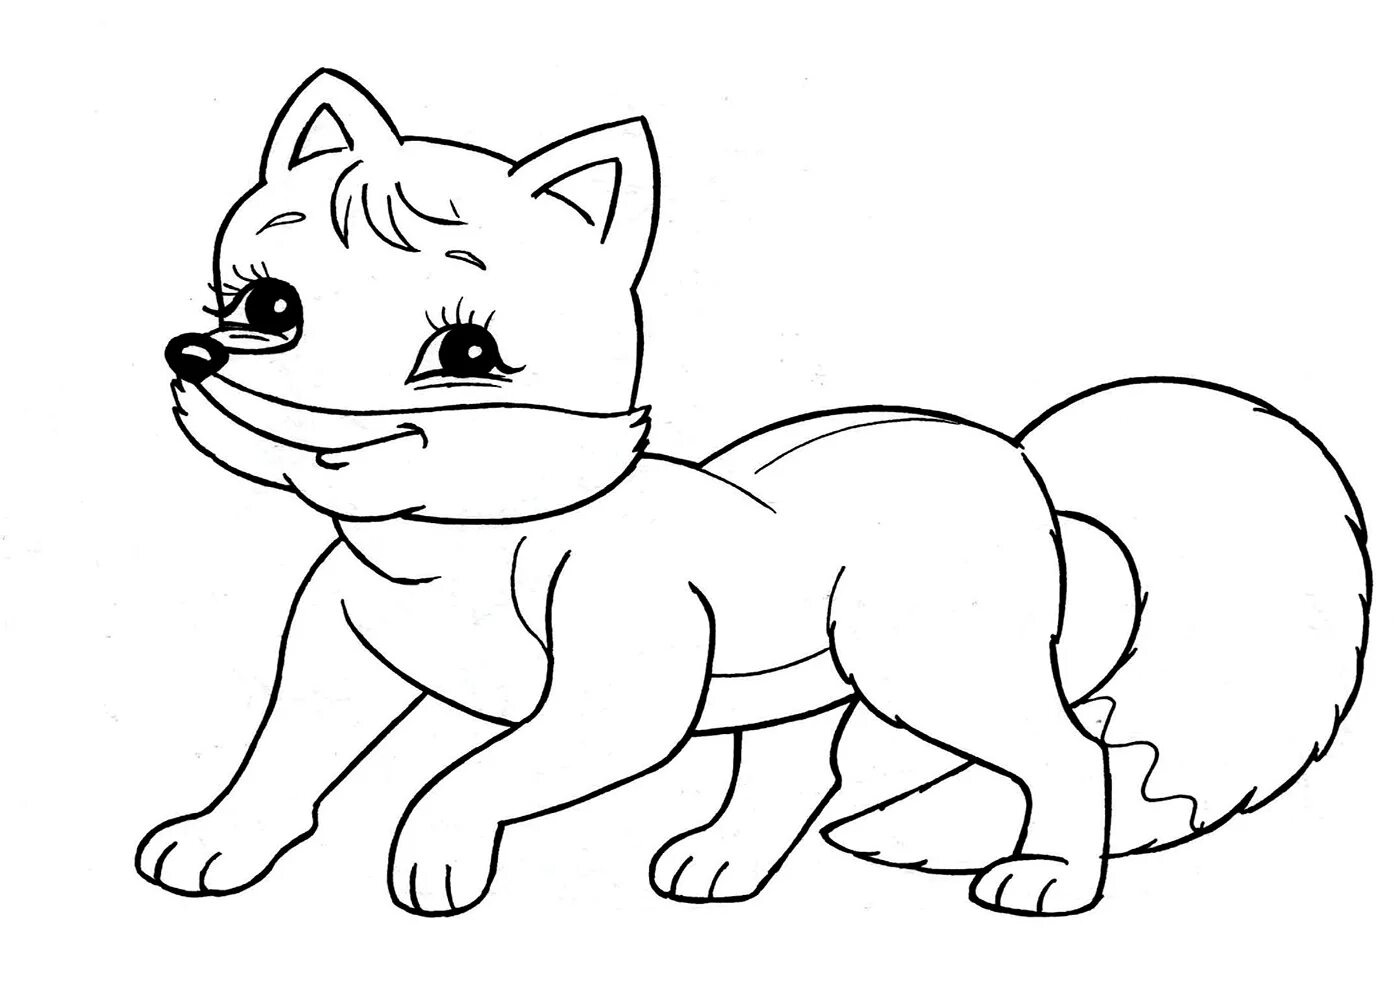 Naughty fox coloring book for 3-4 year olds